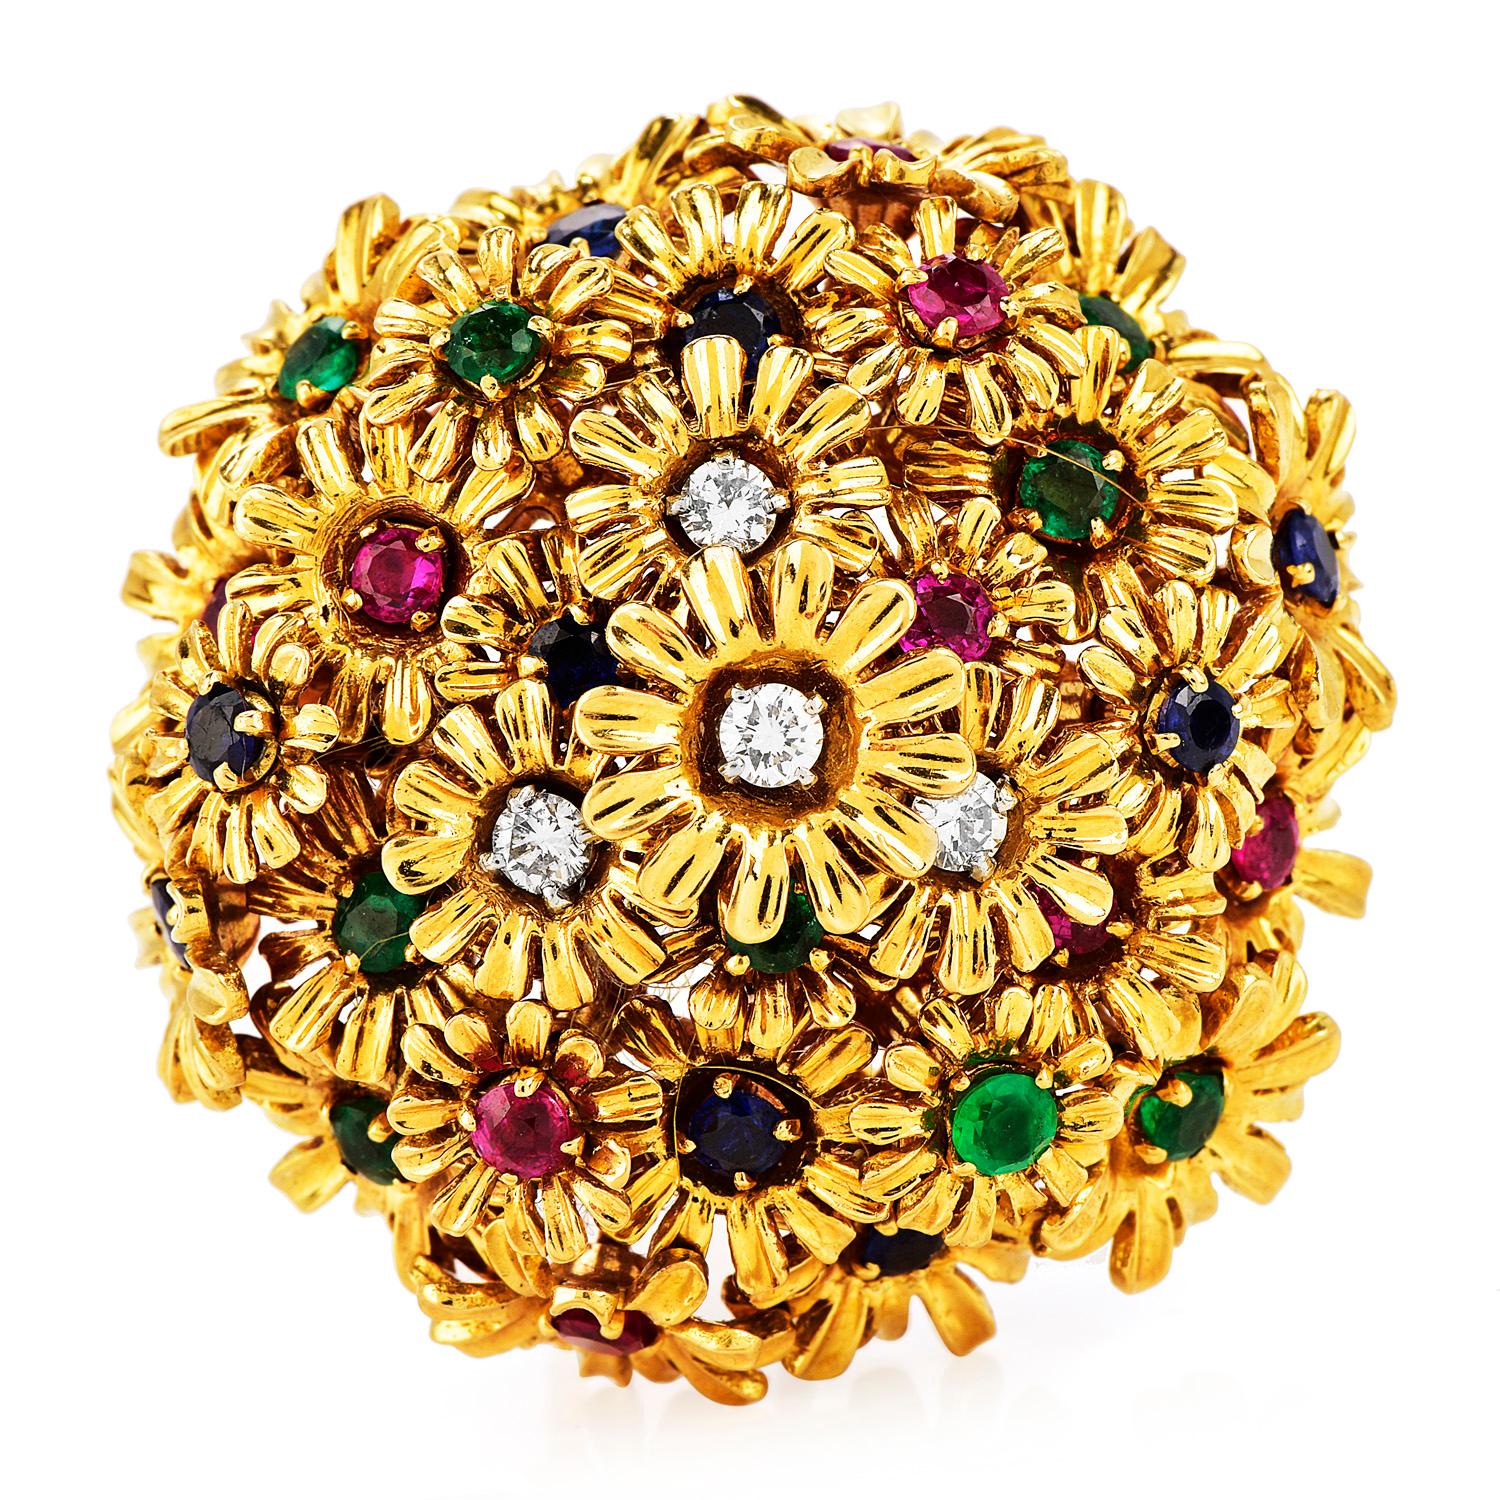 1960s Diamond Ruby Sapphire Emerald 18K Gold Floral Pin Brooch

See life in Vivid colors with these exquisite 1960s Diamond, Ruby, Sapphire, and Emerald Pin Brooch

with a total approximate weight of 34.2 grams.

Expertly Crafted in Solid 18K yellow